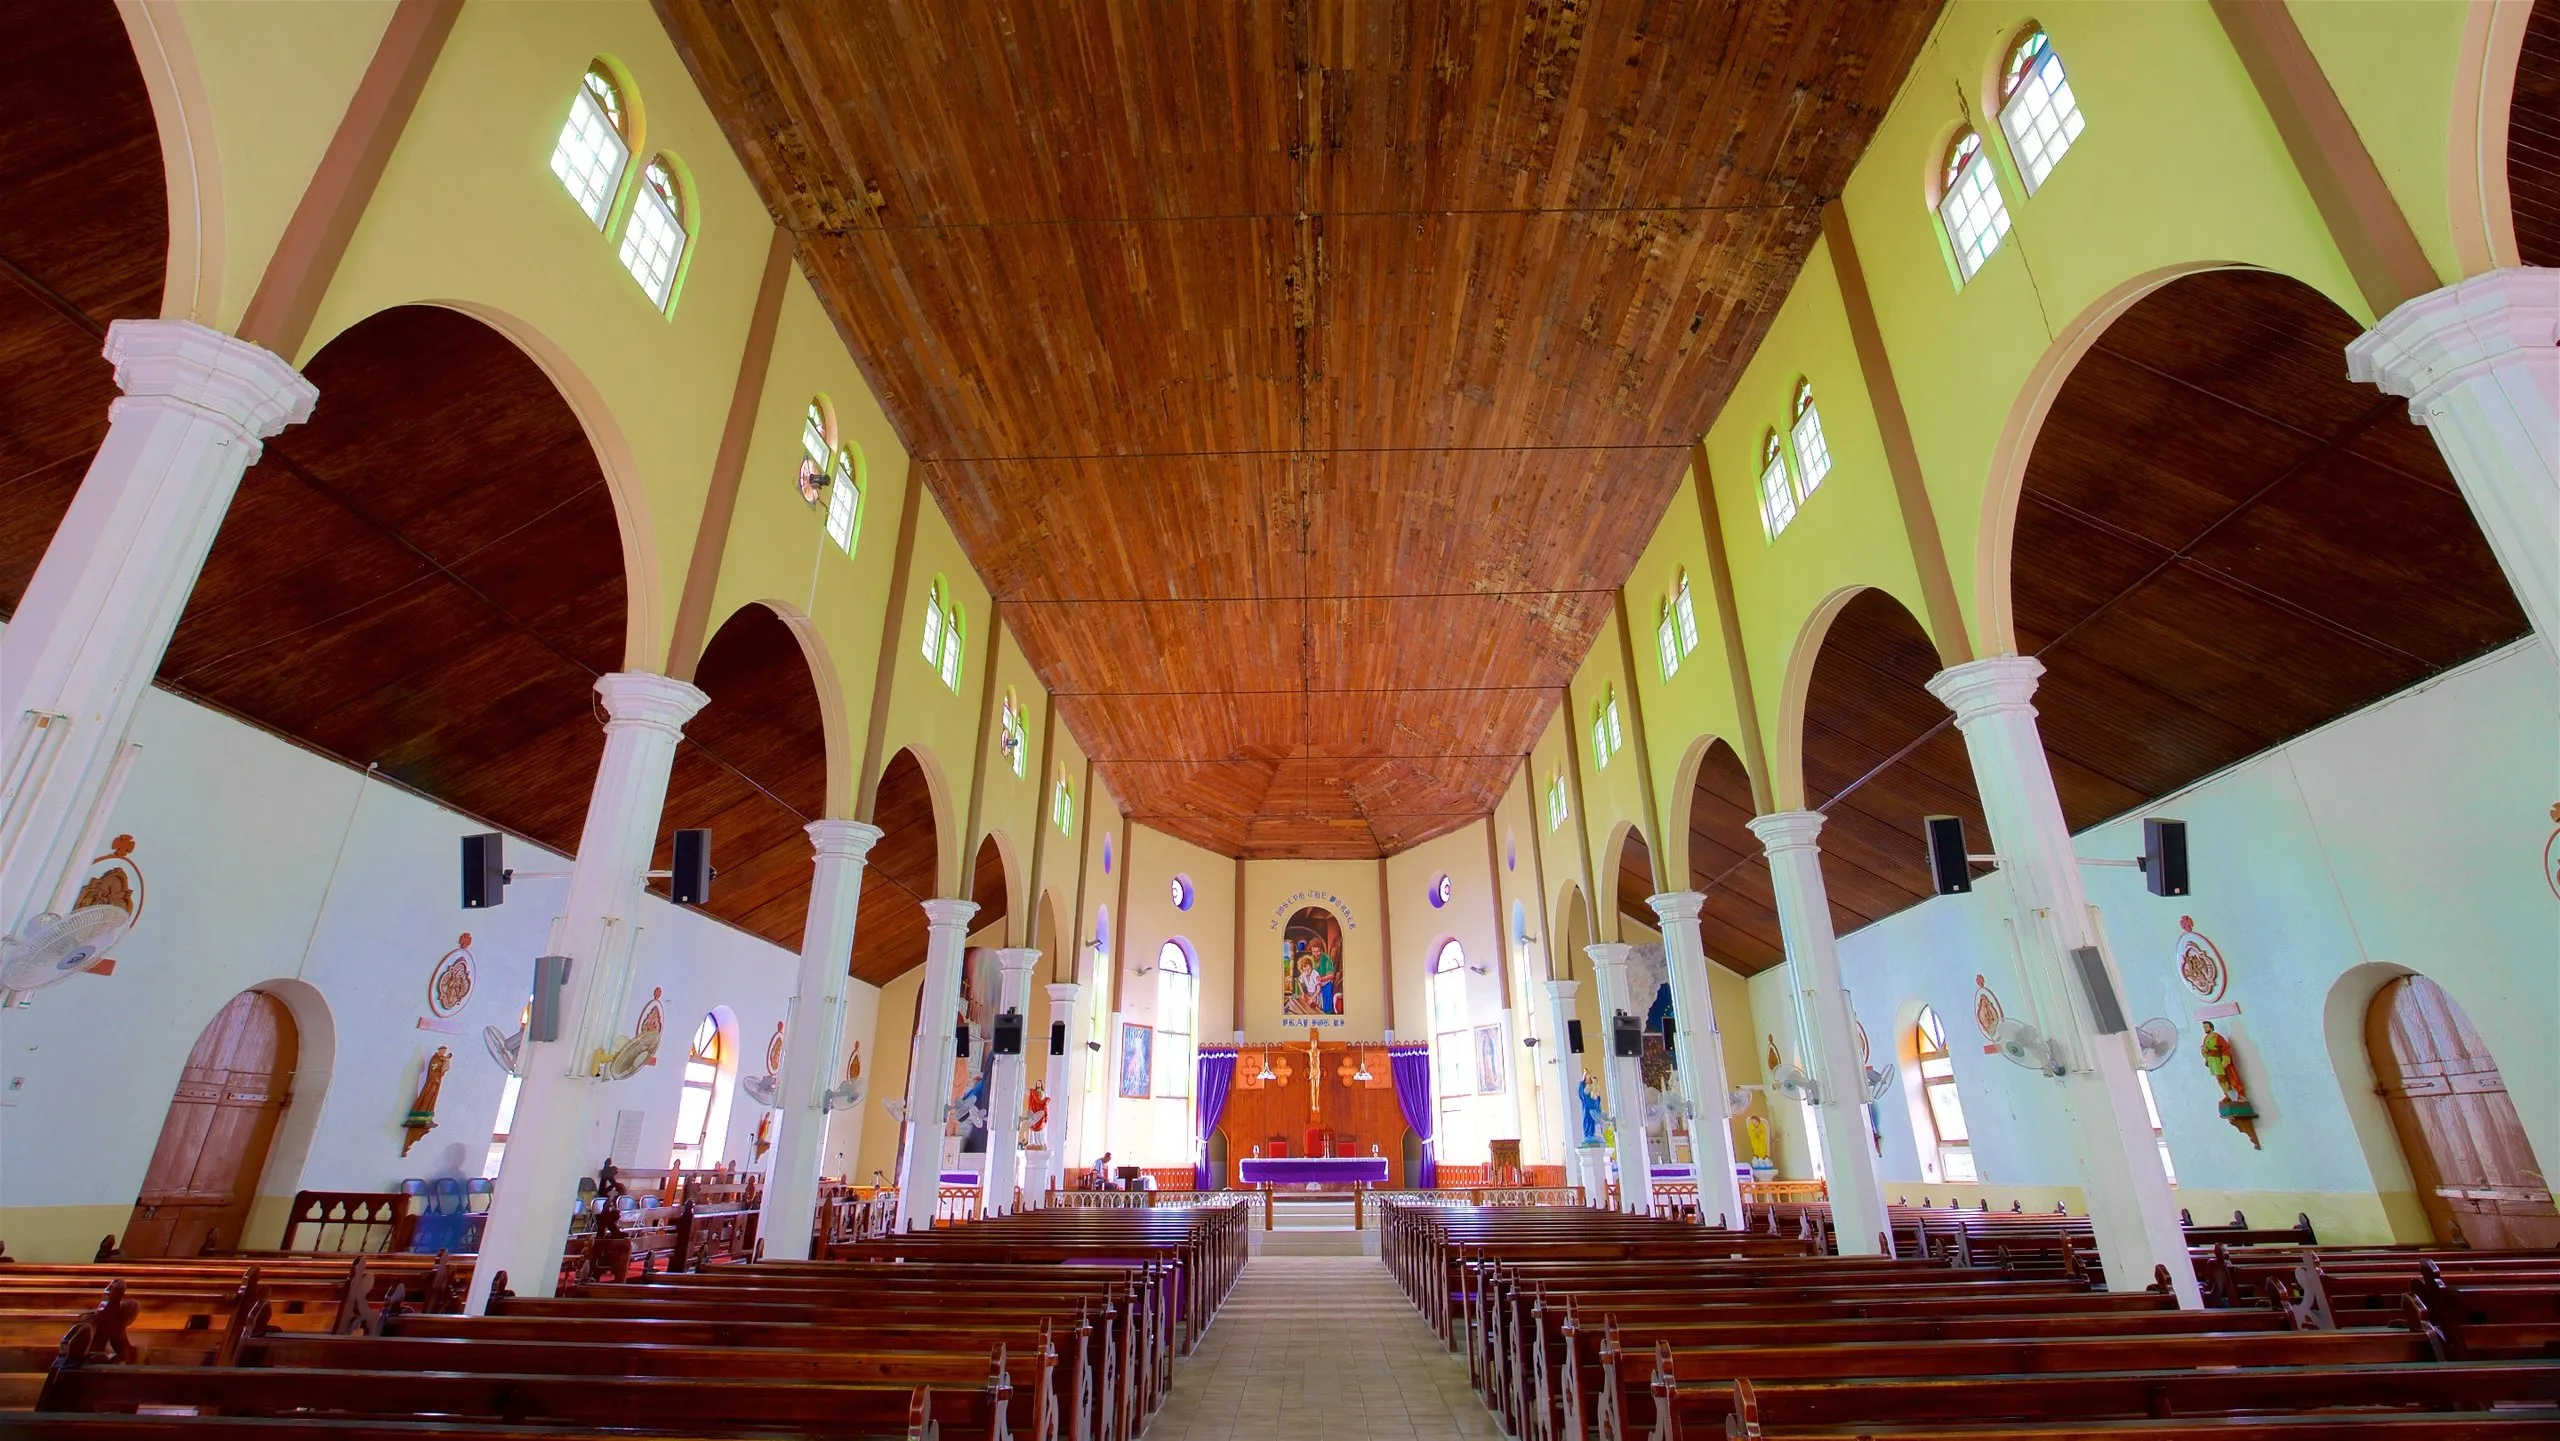 Roman Catholic Church Saints in Gambia, Africa | Architecture - Rated 0.8